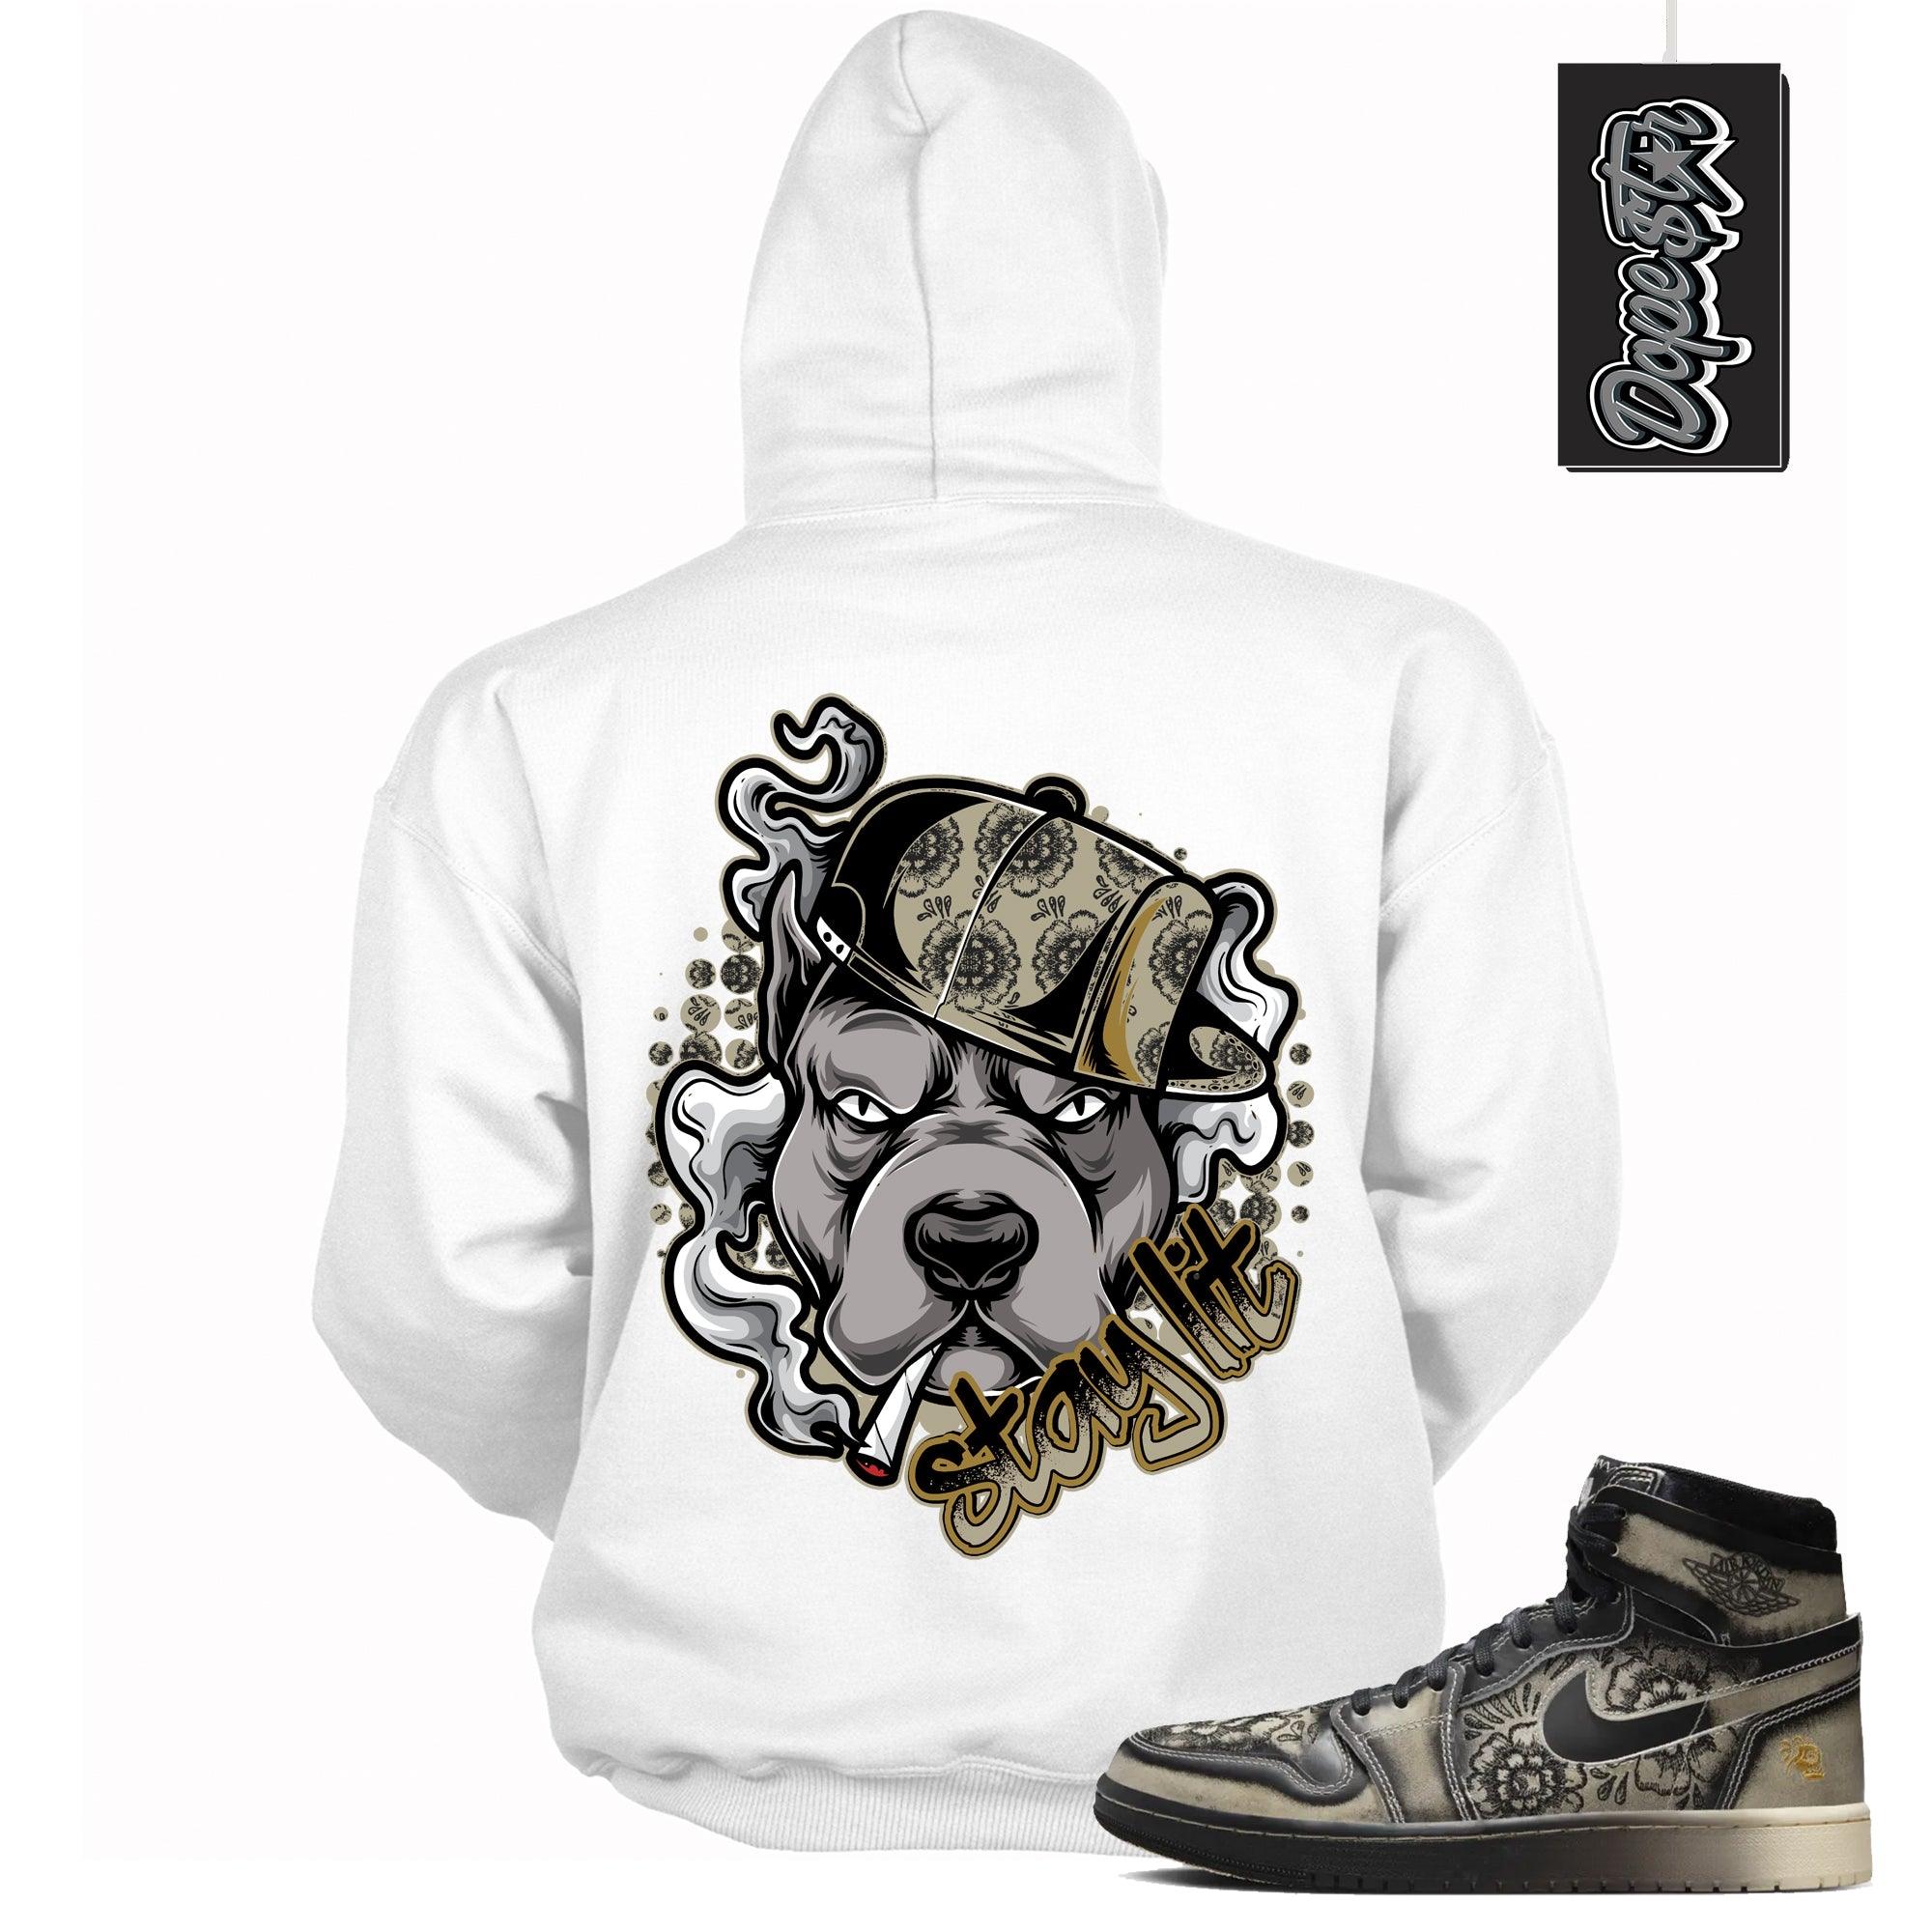 Cool White Graphic Hoodie with “ STAY LIT “ print, that perfectly matches Air Jordan 1 High Zoom Comfort 2 Dia de Muertos Black and Pale Ivory sneakers